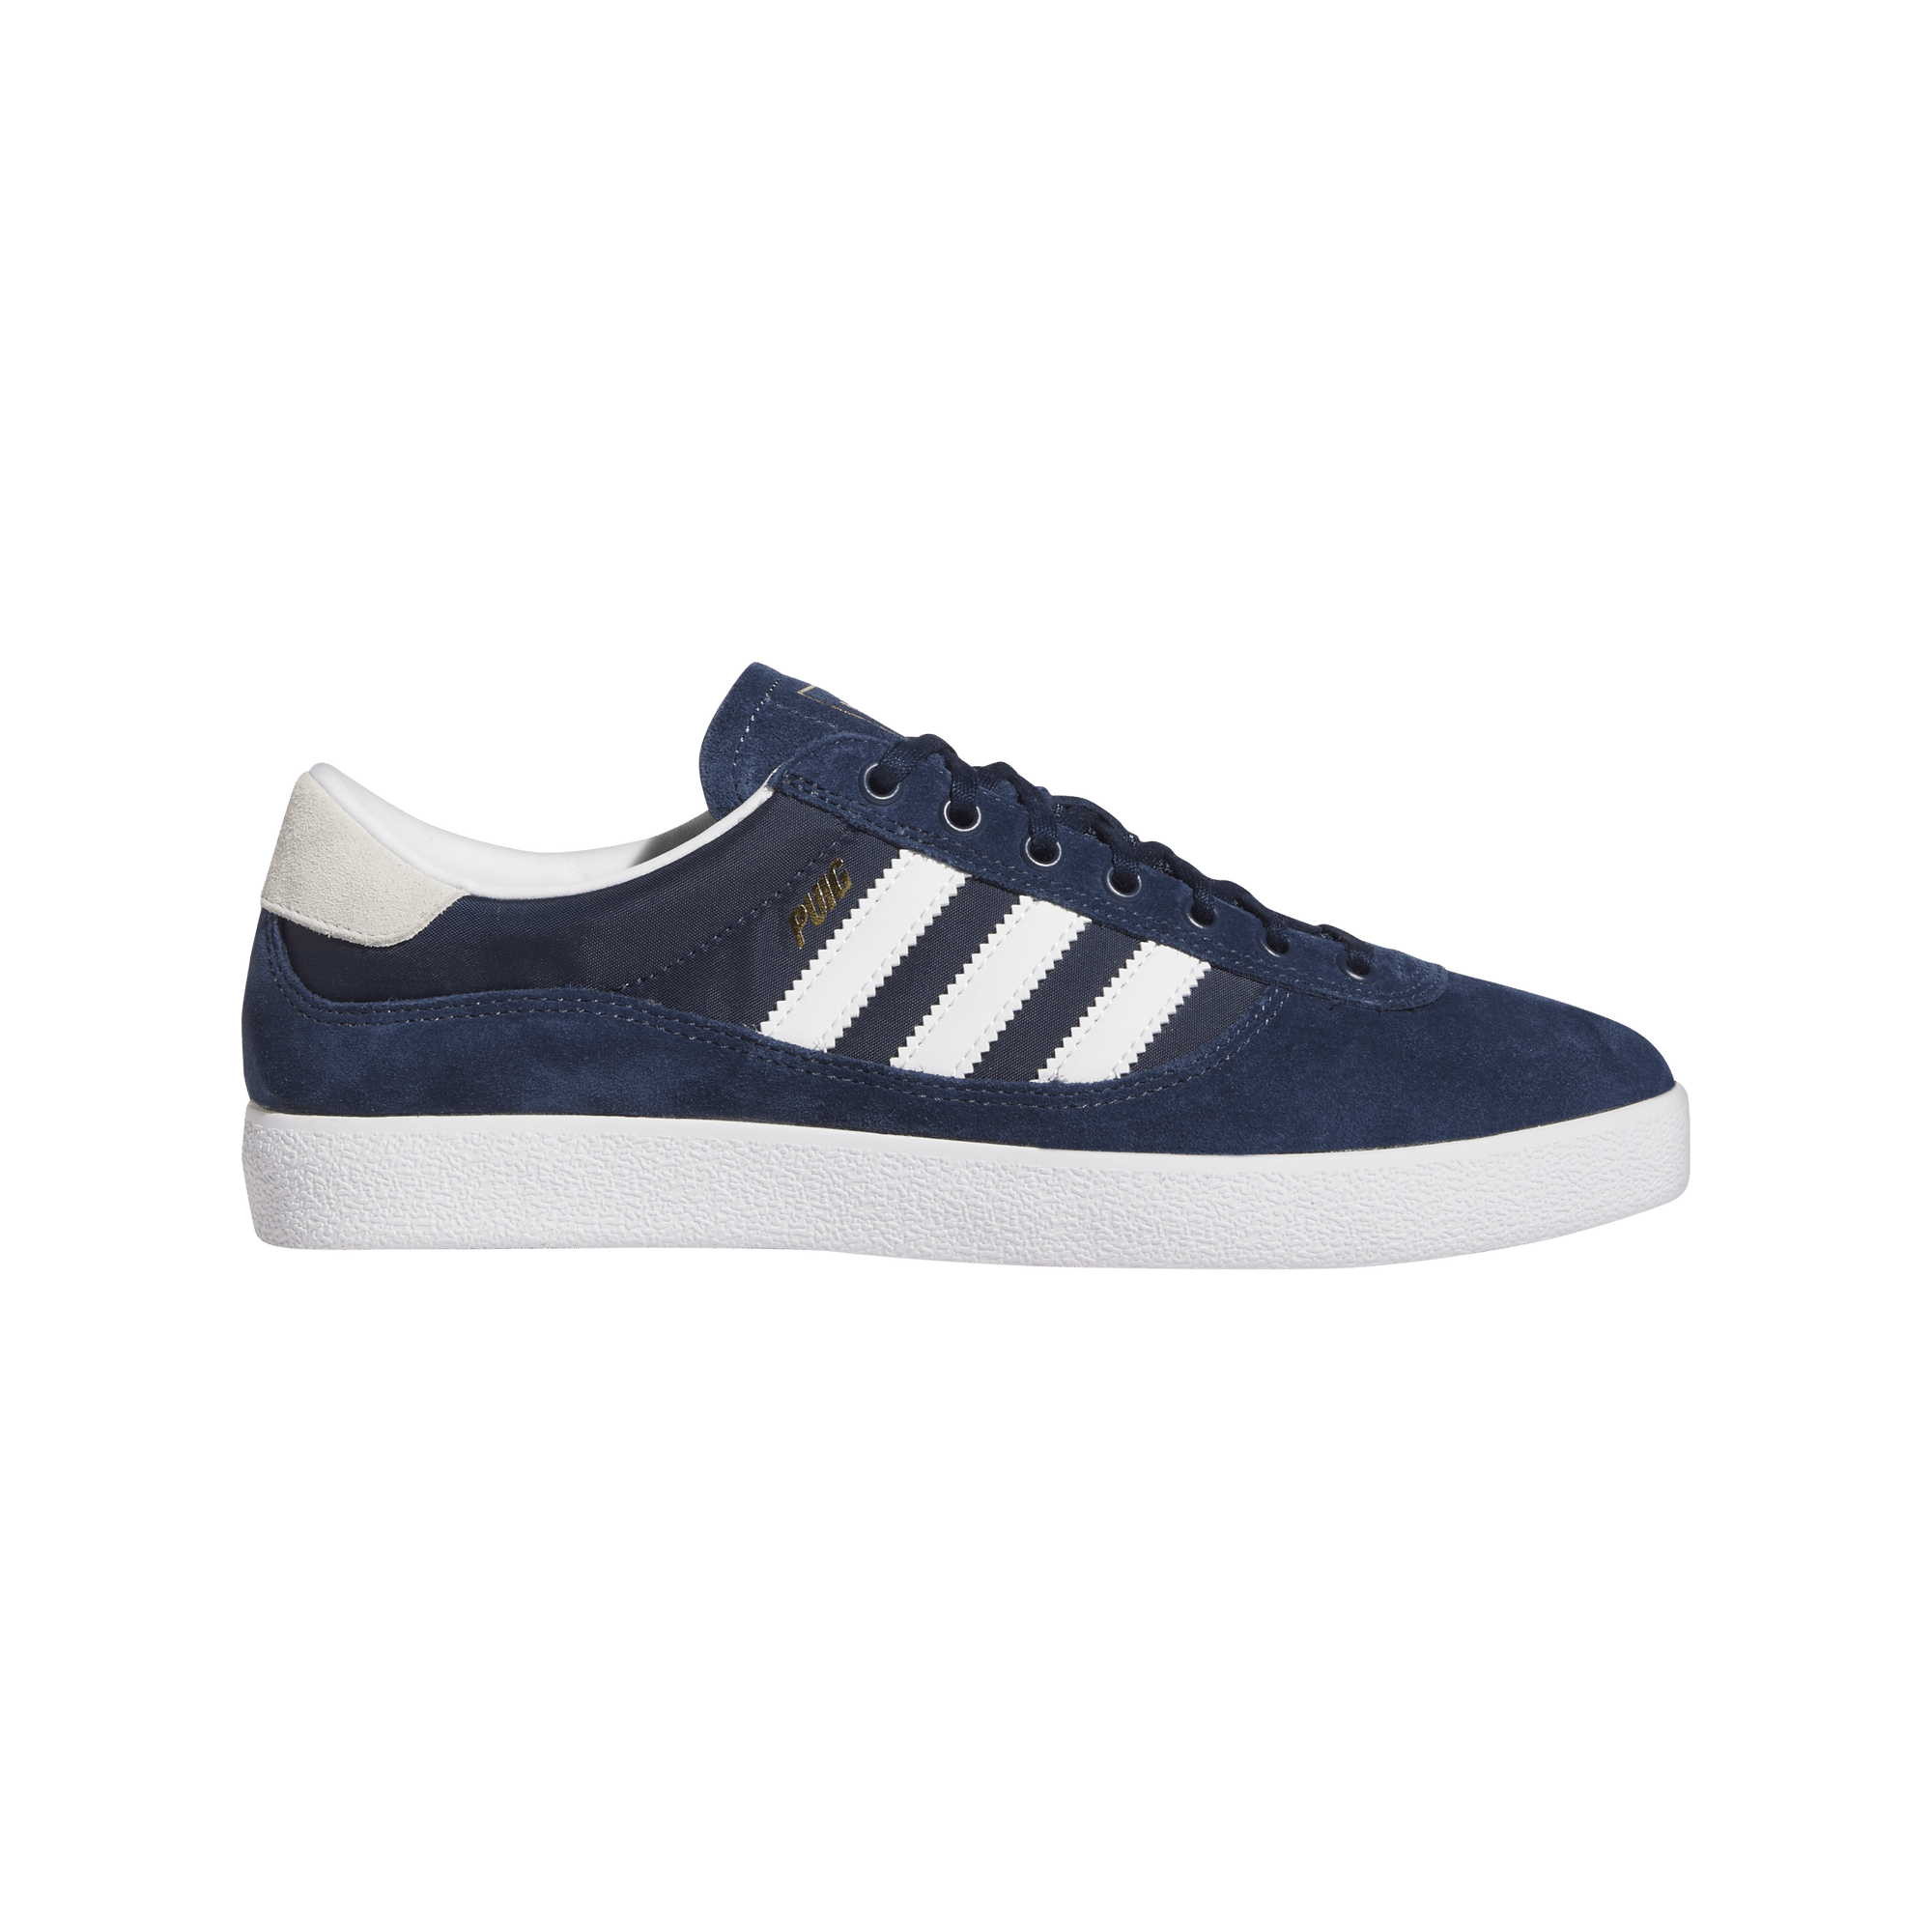 ADIDAS Puig Indoor Shoes Collegiate Navy/Cloud White/Shadow Navy Men's Skate Shoes Adidas 